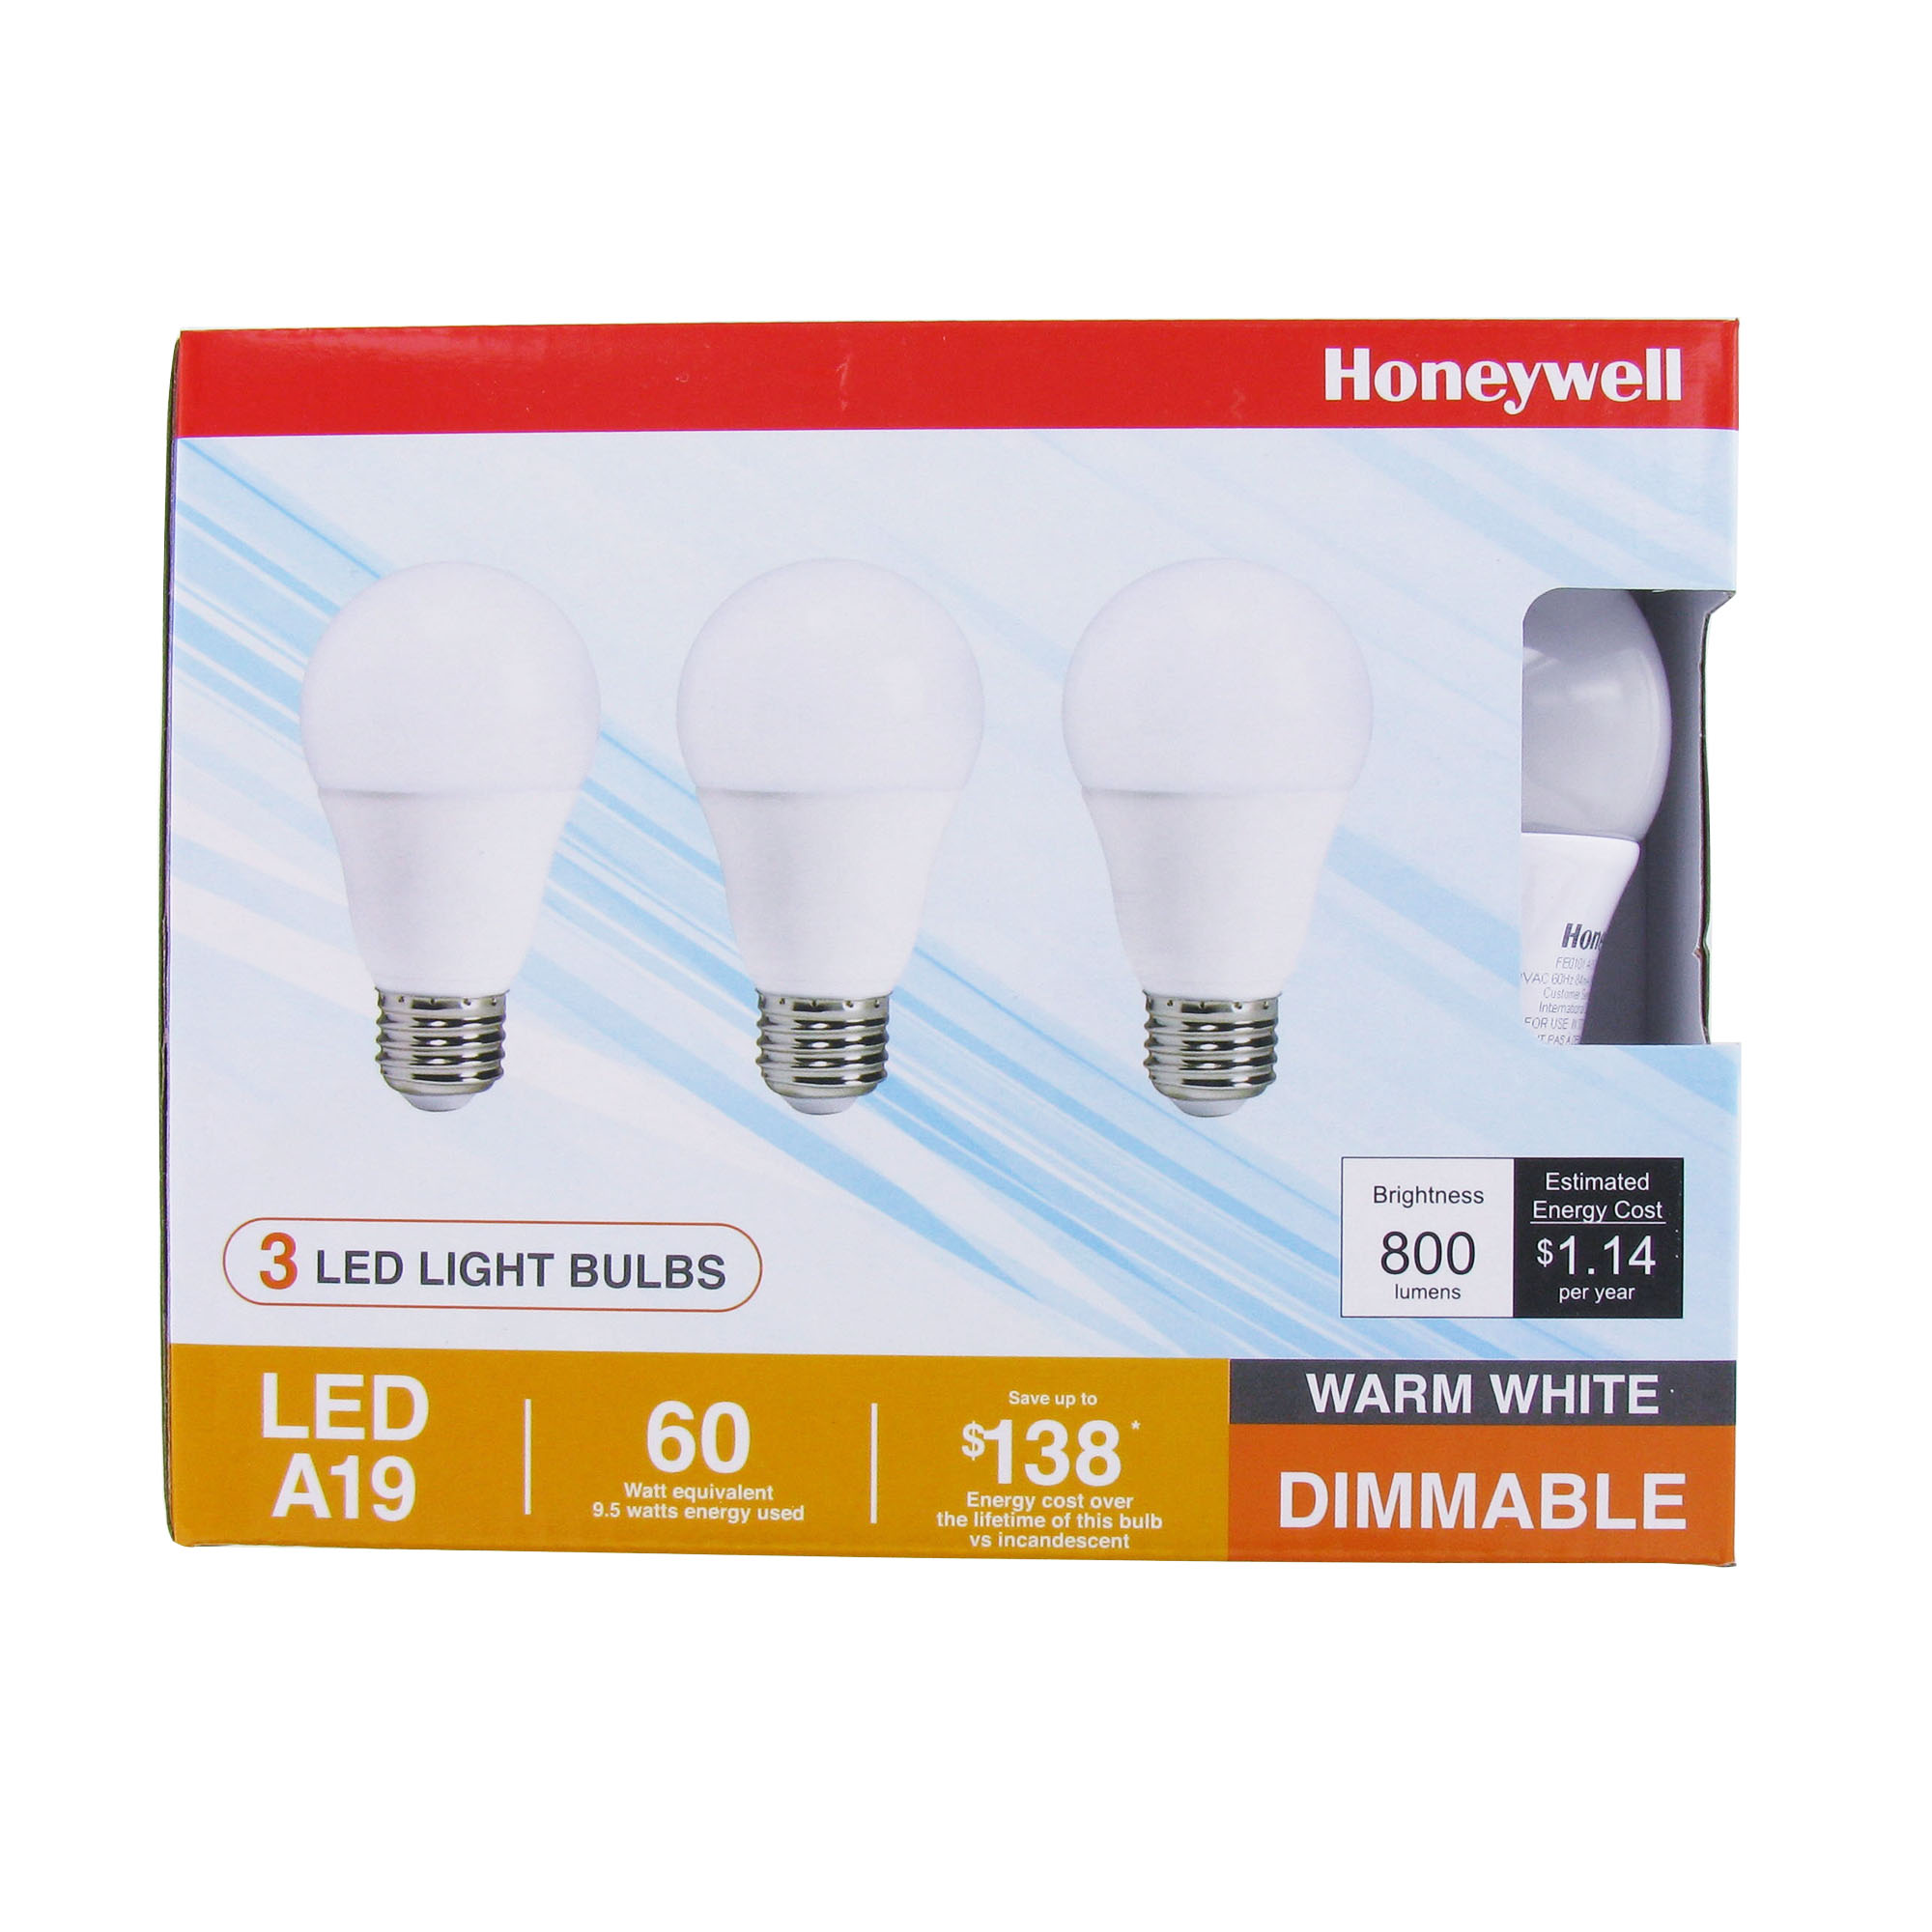 2 Pack Bundle of Honeywell 60W Equivalent A19 Dimmable LED Light Bulb - 6 Bulbs, FE0101